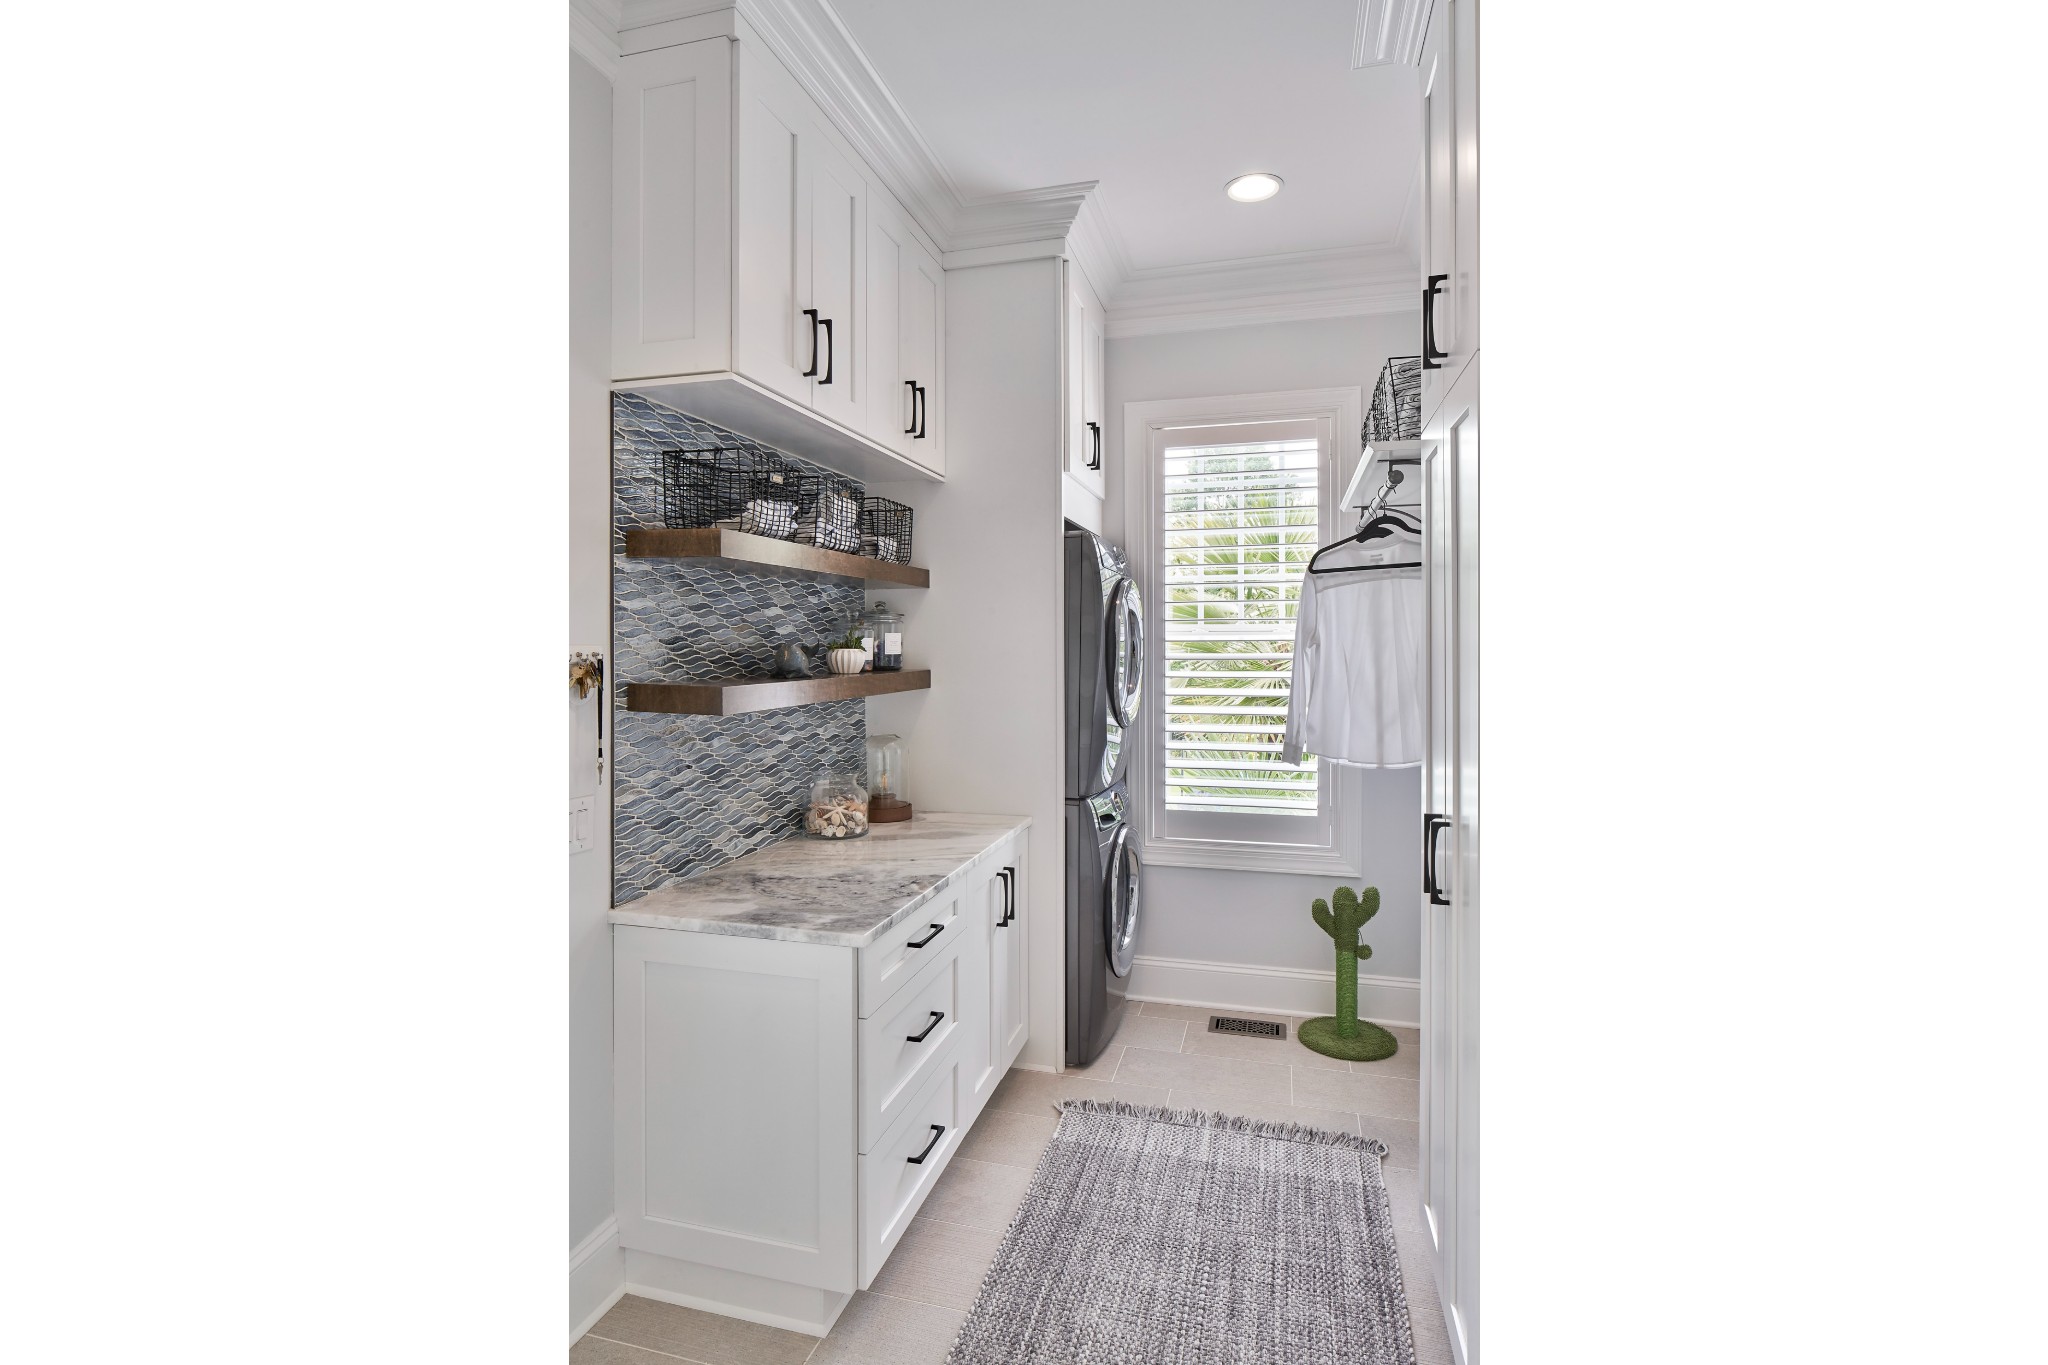 Large casual coastal laundry room renovation with custom cabinetry and countertop space